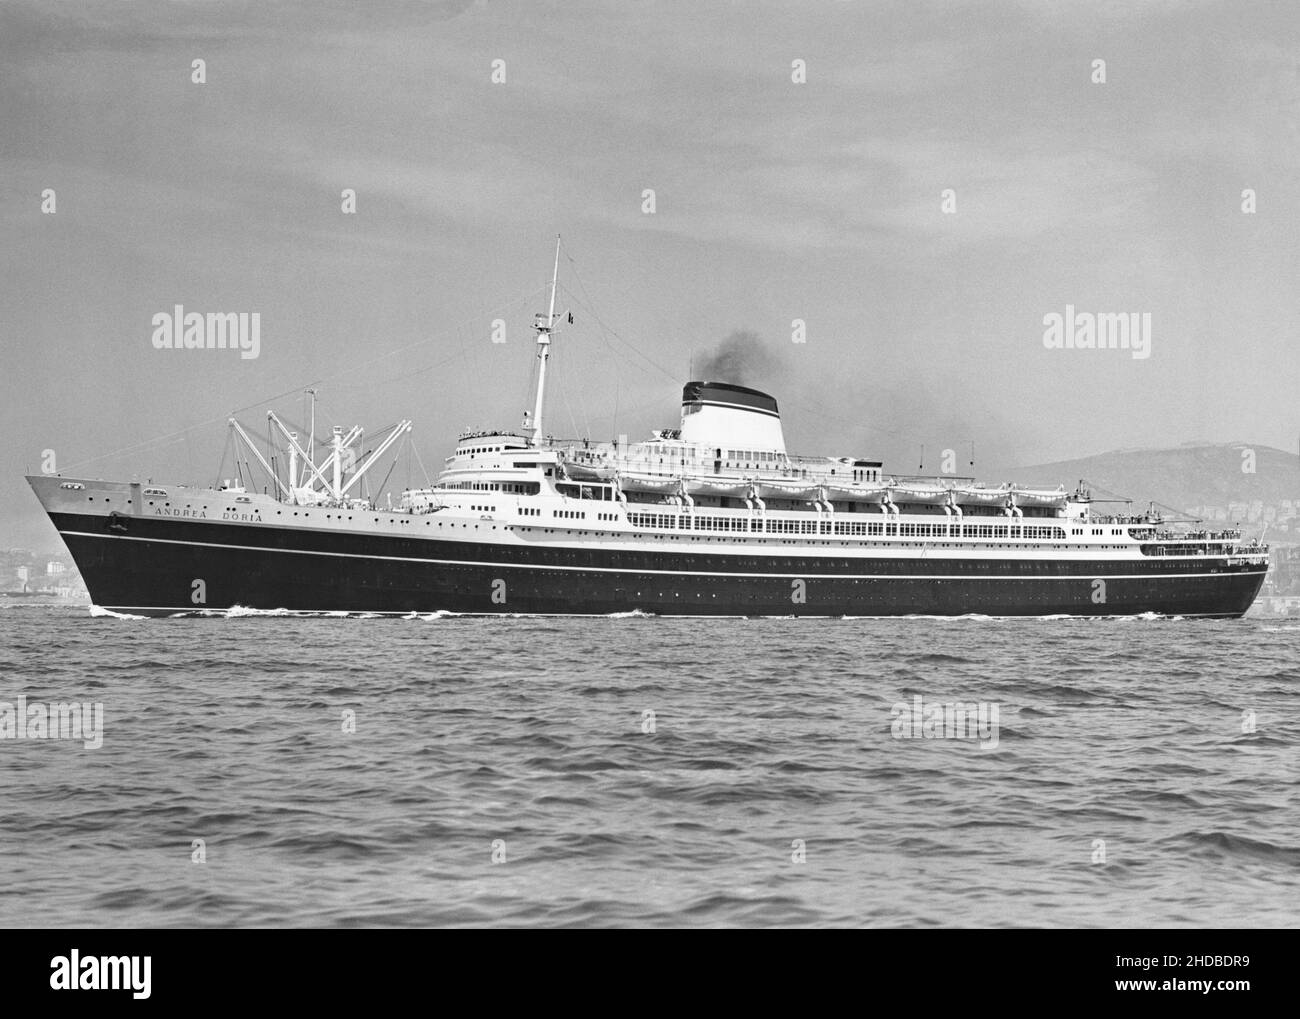 SS Andrea Doria at sea in the early 1950s. The ship was an ocean liner for the Italian Line (Società di Navigazione Italia) and its home port was Genoa, Italy. She made her maiden voyage in 1953. On 25 July 1956 while Andrea Doria was near the coast of Massachusetts, USA, the liner ‘Stockholm’ collided with her. Andrea Doria started to list severely to starboard. The ship stayed afloat for 11 hours. 1,660 passengers and crew survived. However, 46 people on the ship died as a direct result of the collision. The evacuated liner capsized and sank the following morning – a vintage 1950s photograph Stock Photo